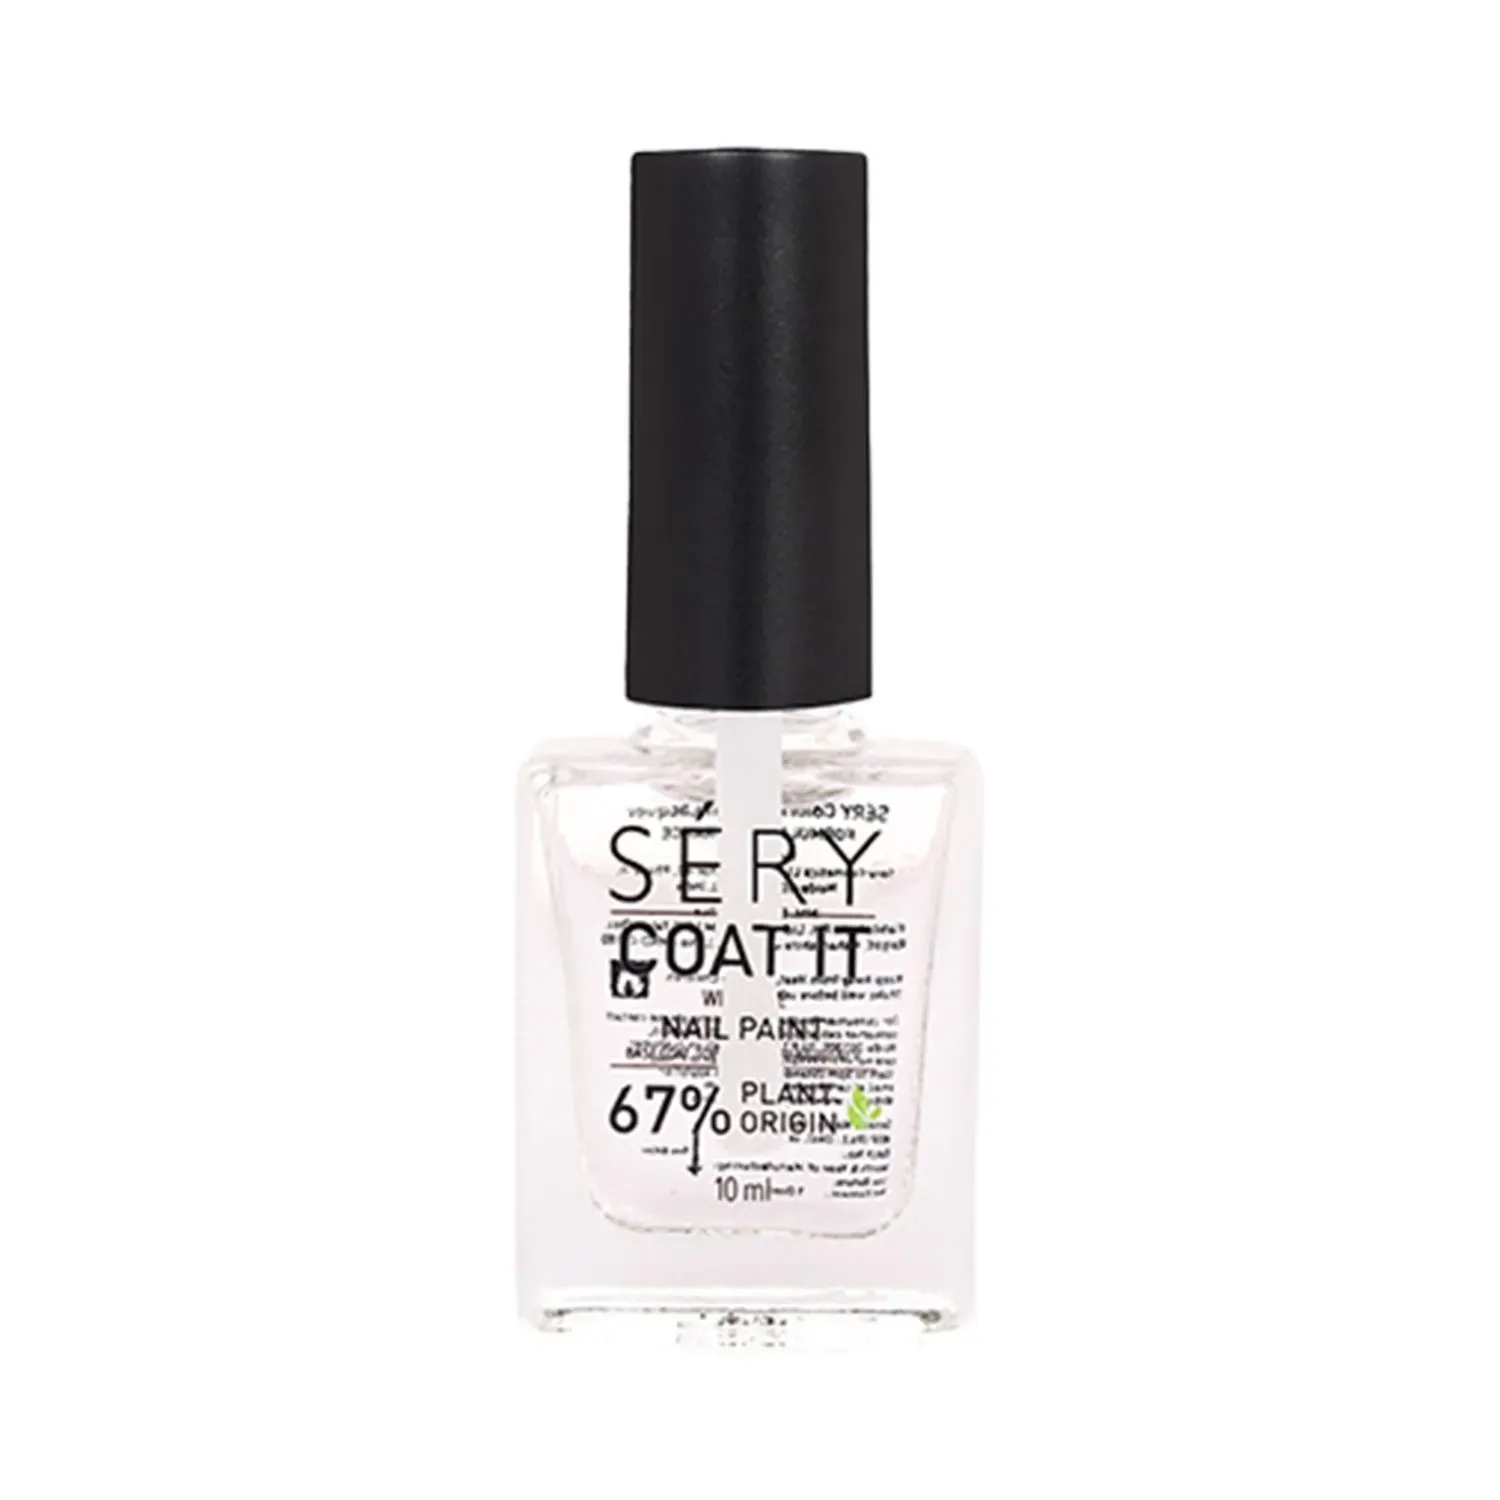 Orimes New Nail Paint Colors like Turqoish, Black, Silver,Top coat Who  Talking With You